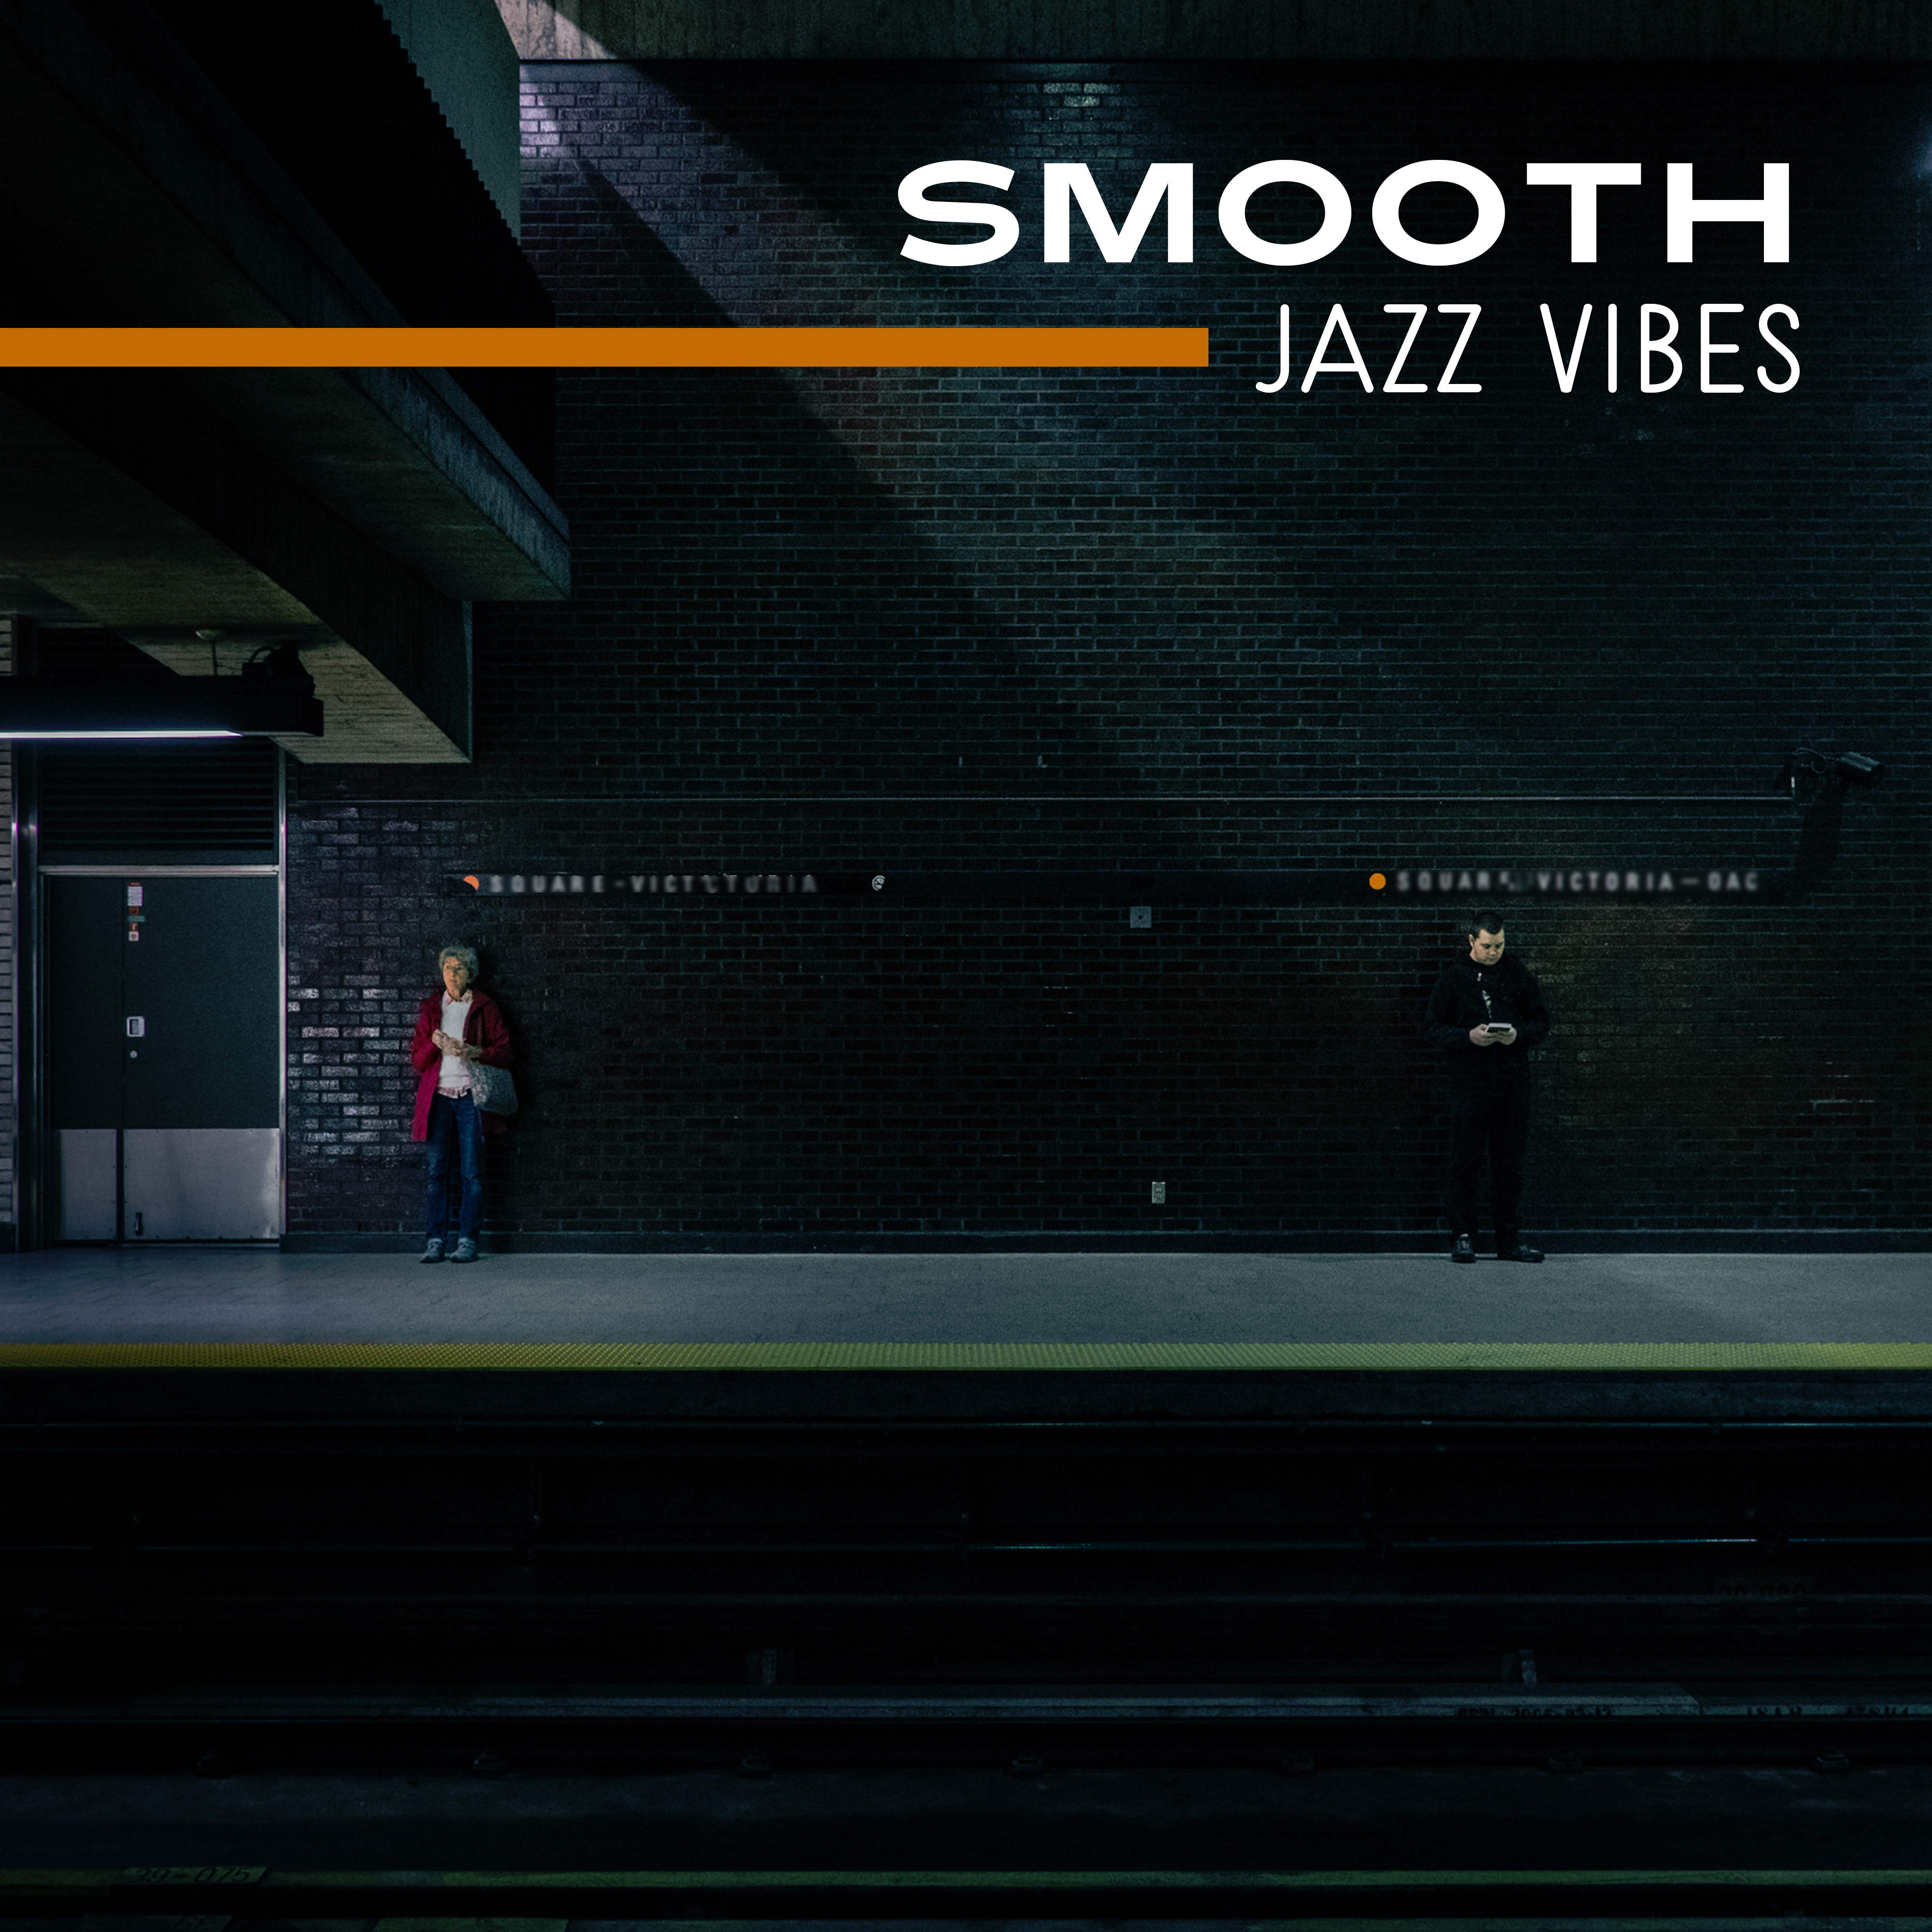 Smooth Jazz Vibes – Calming Jazz to Relax, Smooth Music, Piano Bar Sounds